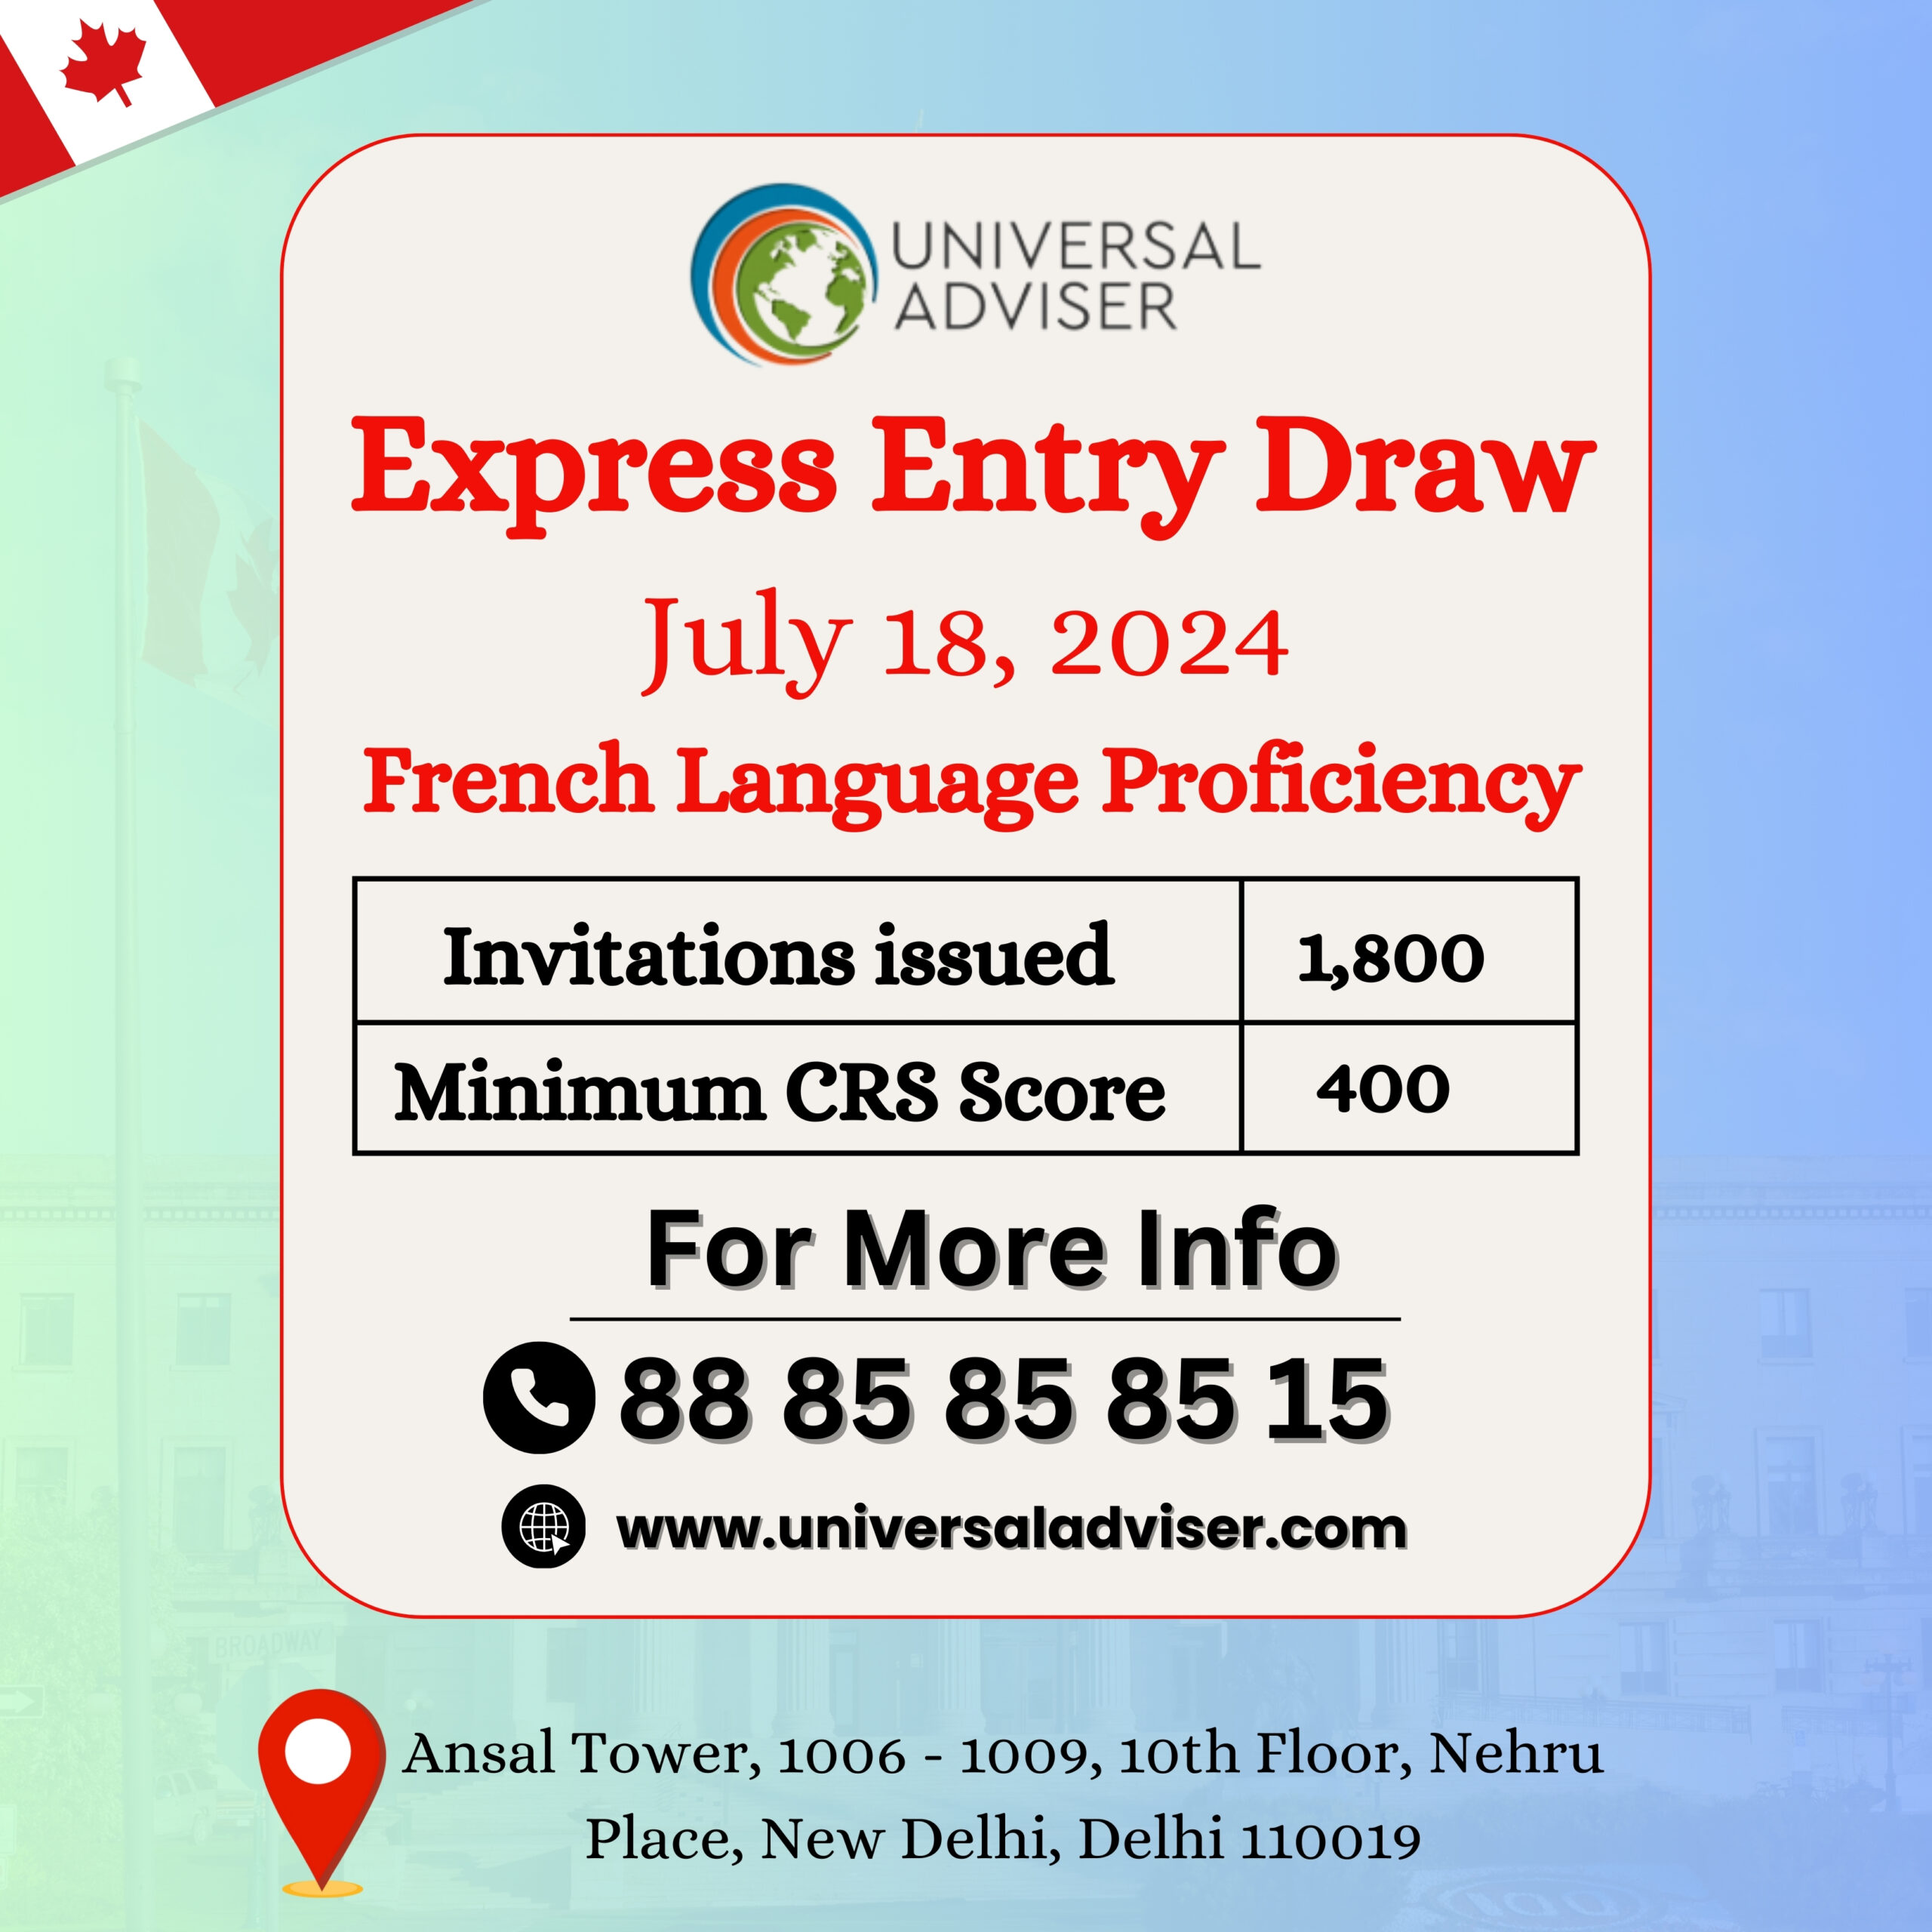 Express Entry Draws- New Draw Issues 1,800 ITAs to French-Speaking Candidates